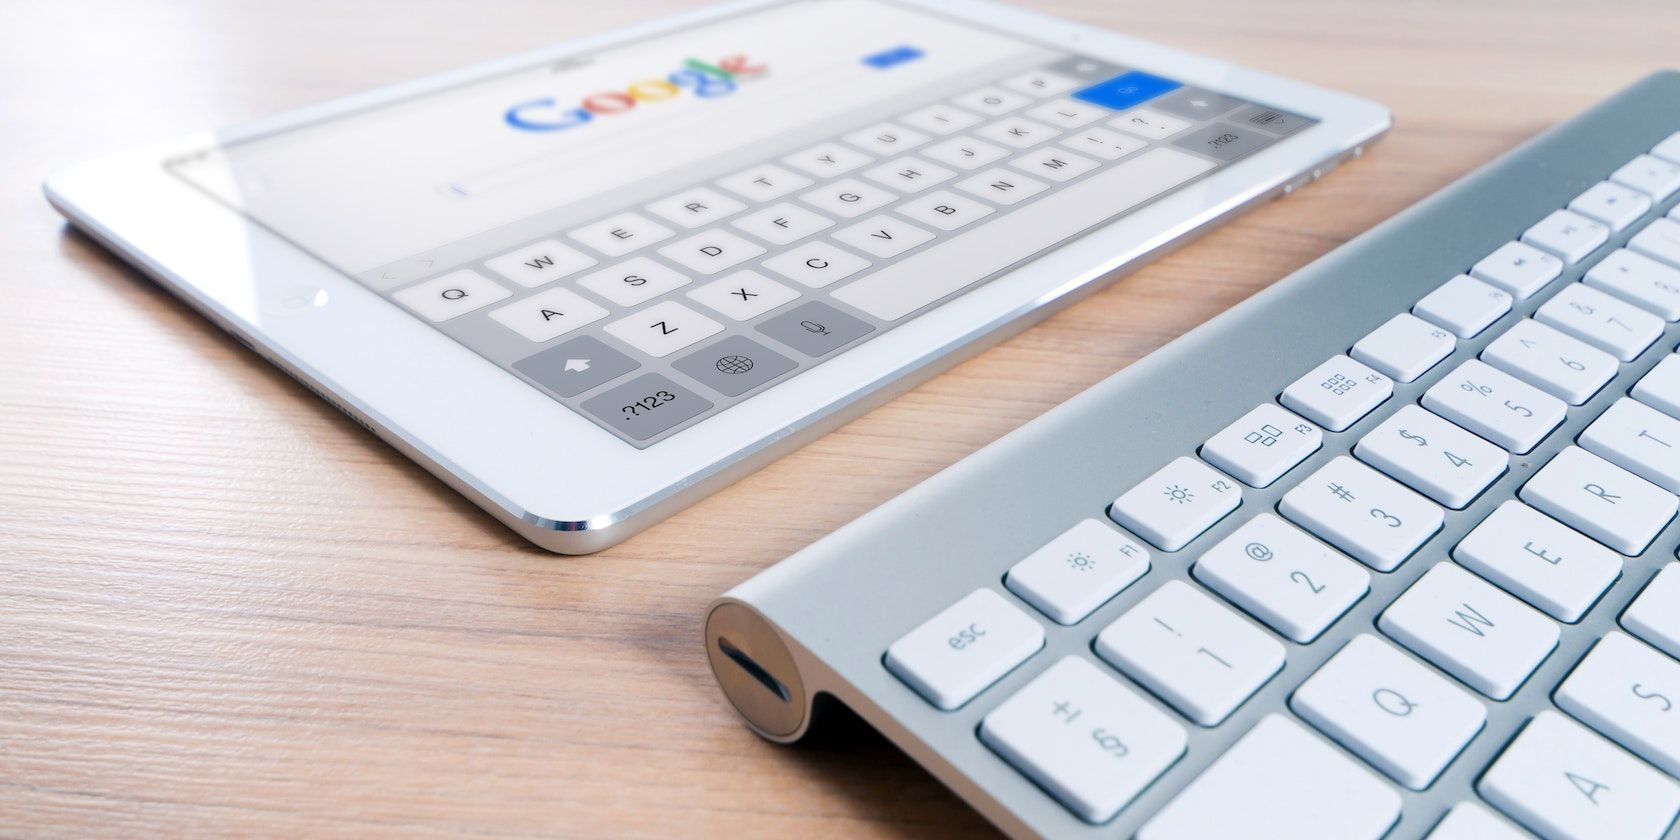 Keyboard and a tablet showing a blurred Google search page